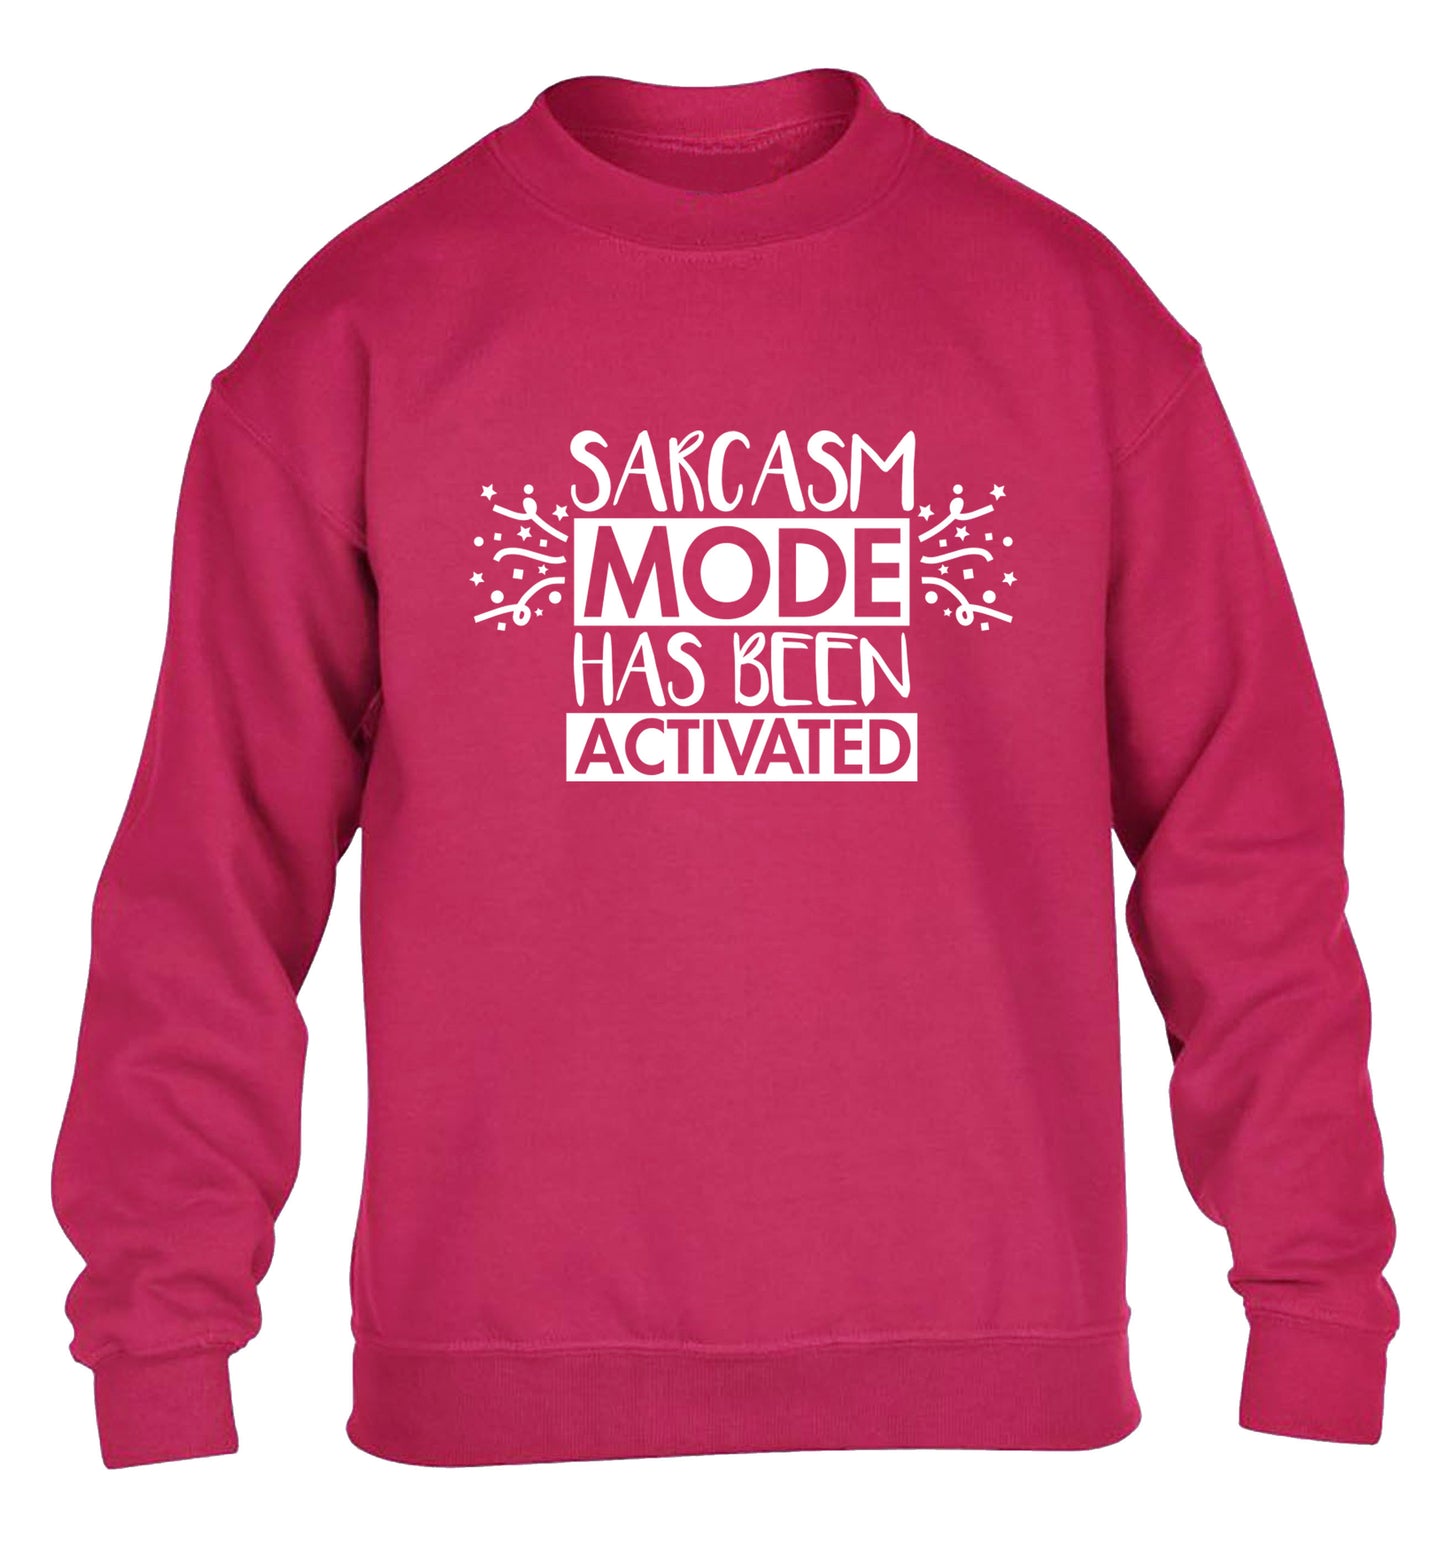 Sarcarsm mode has been activated children's pink sweater 12-14 Years